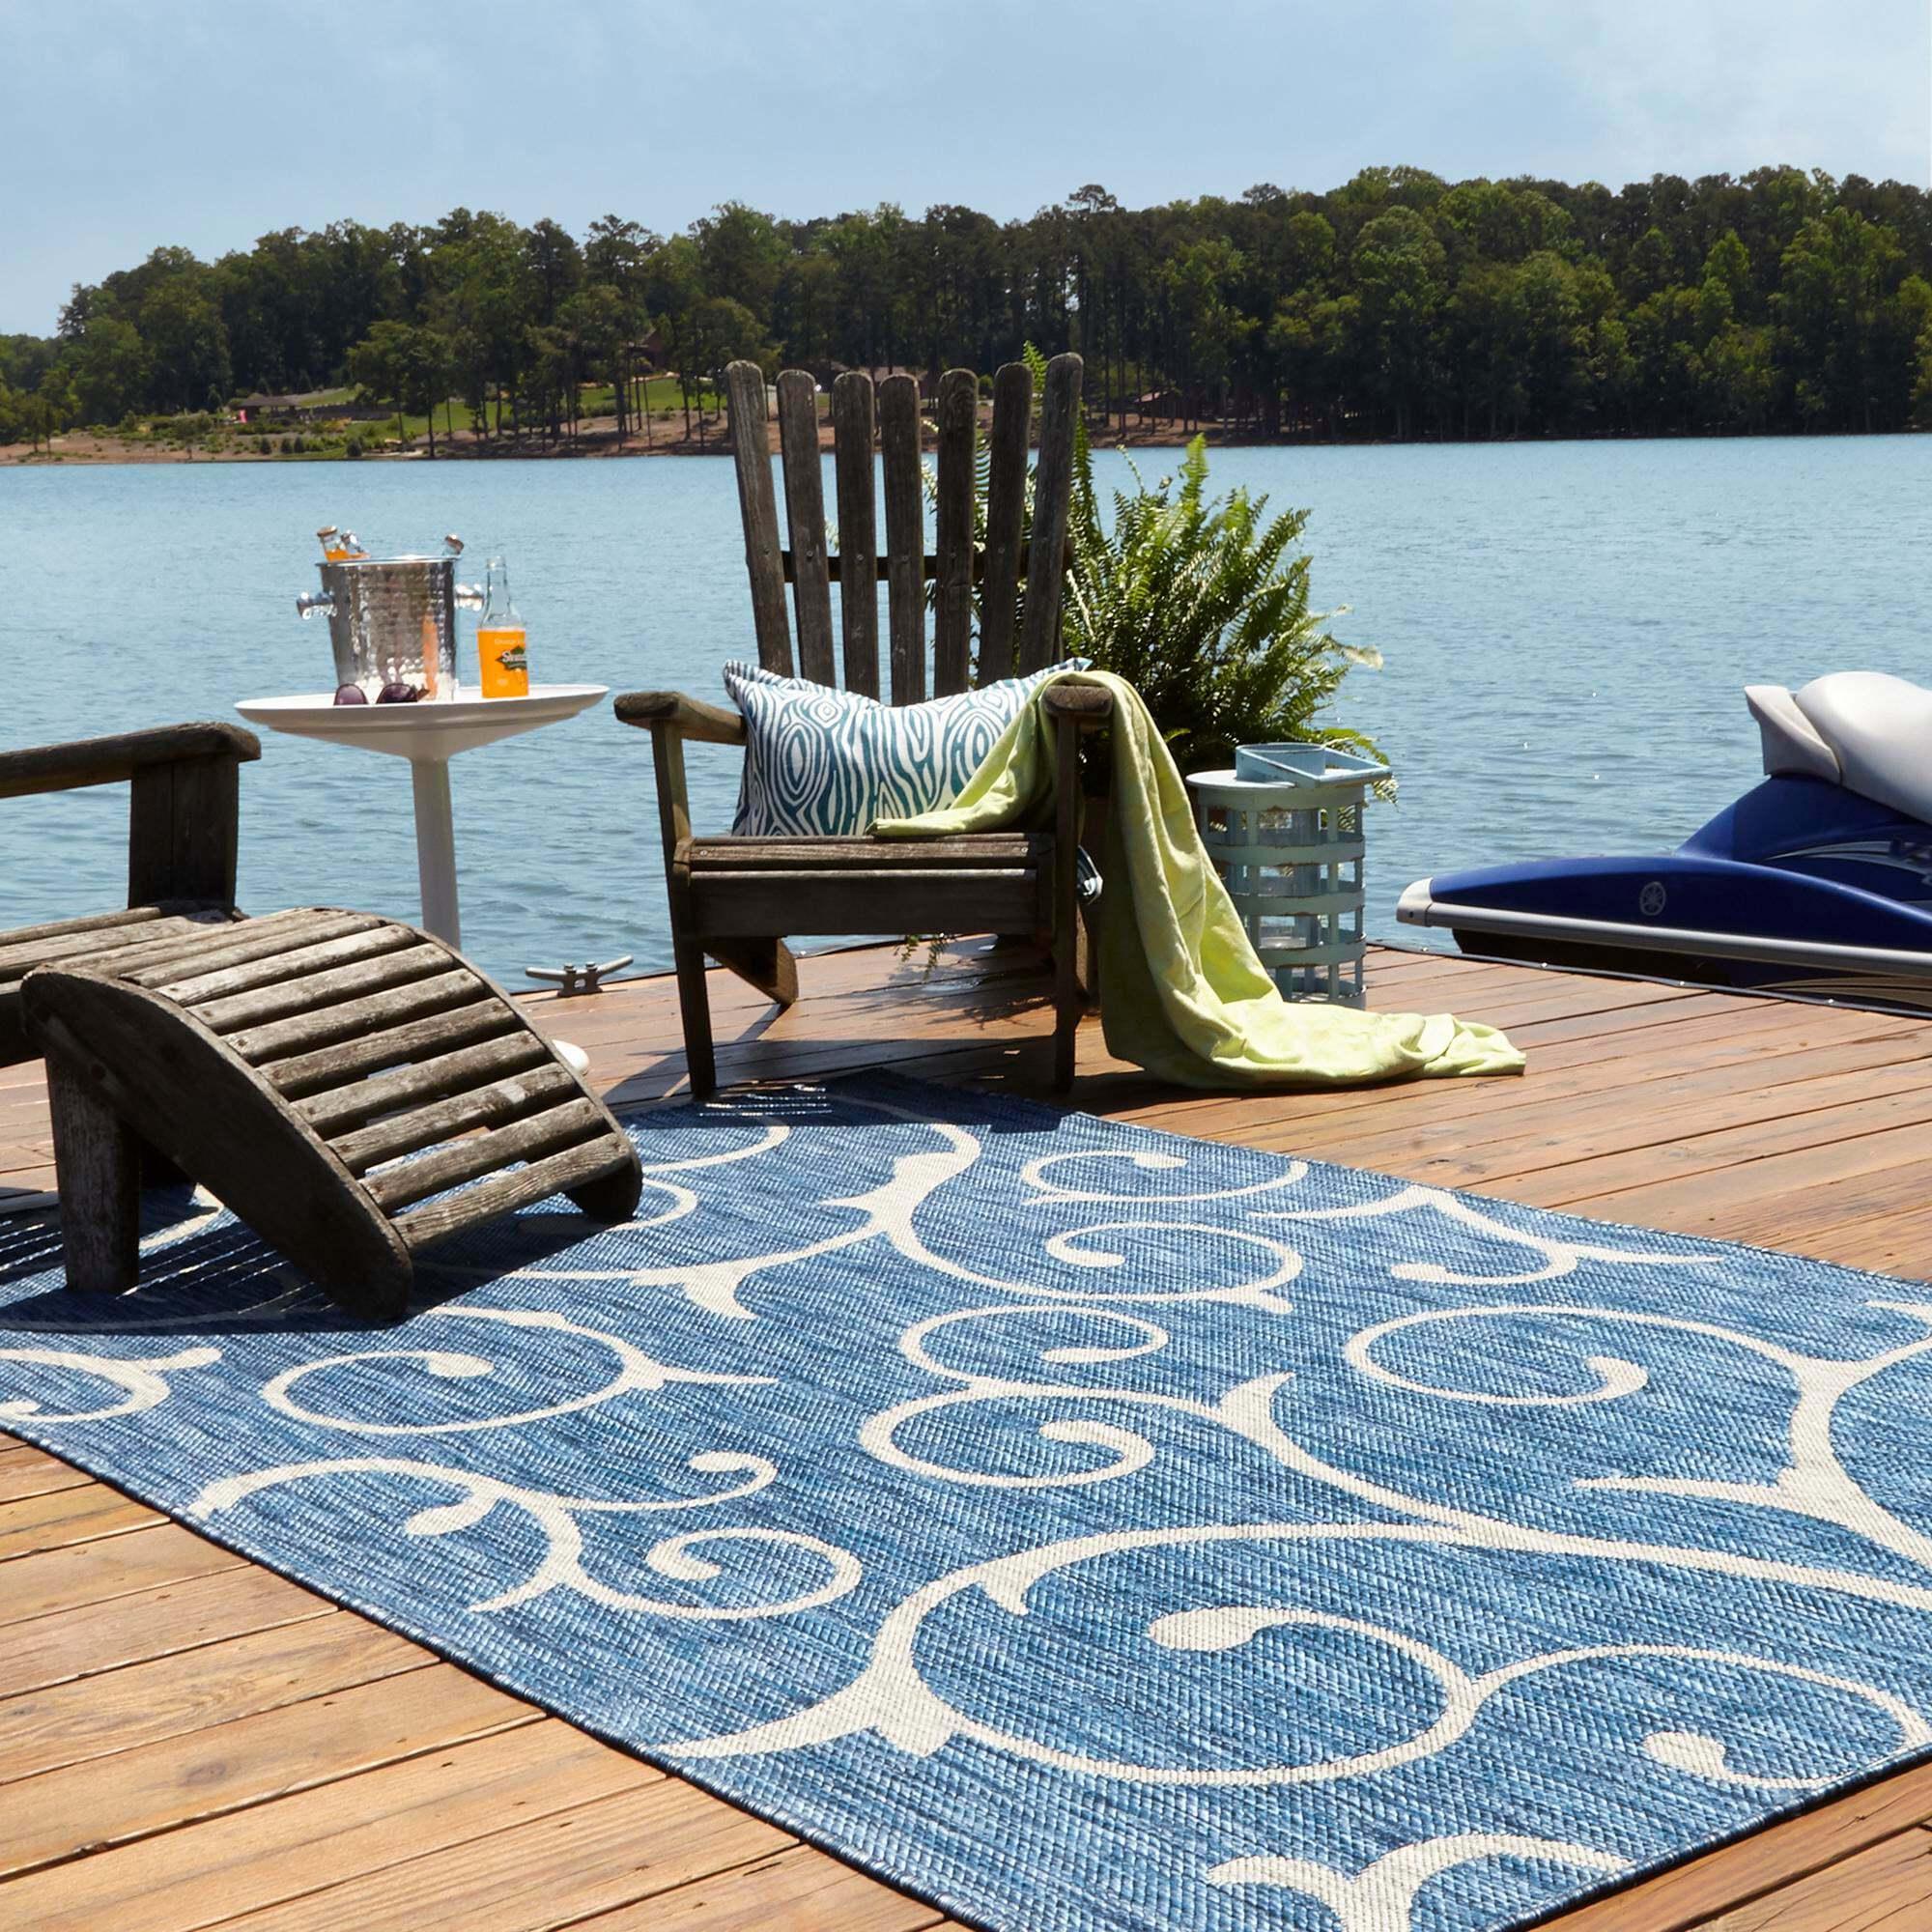 Unique Loom Outdoor Rugs - Outdoor Botanical Damask Rectangular 8x11 Rug Blue & Gray